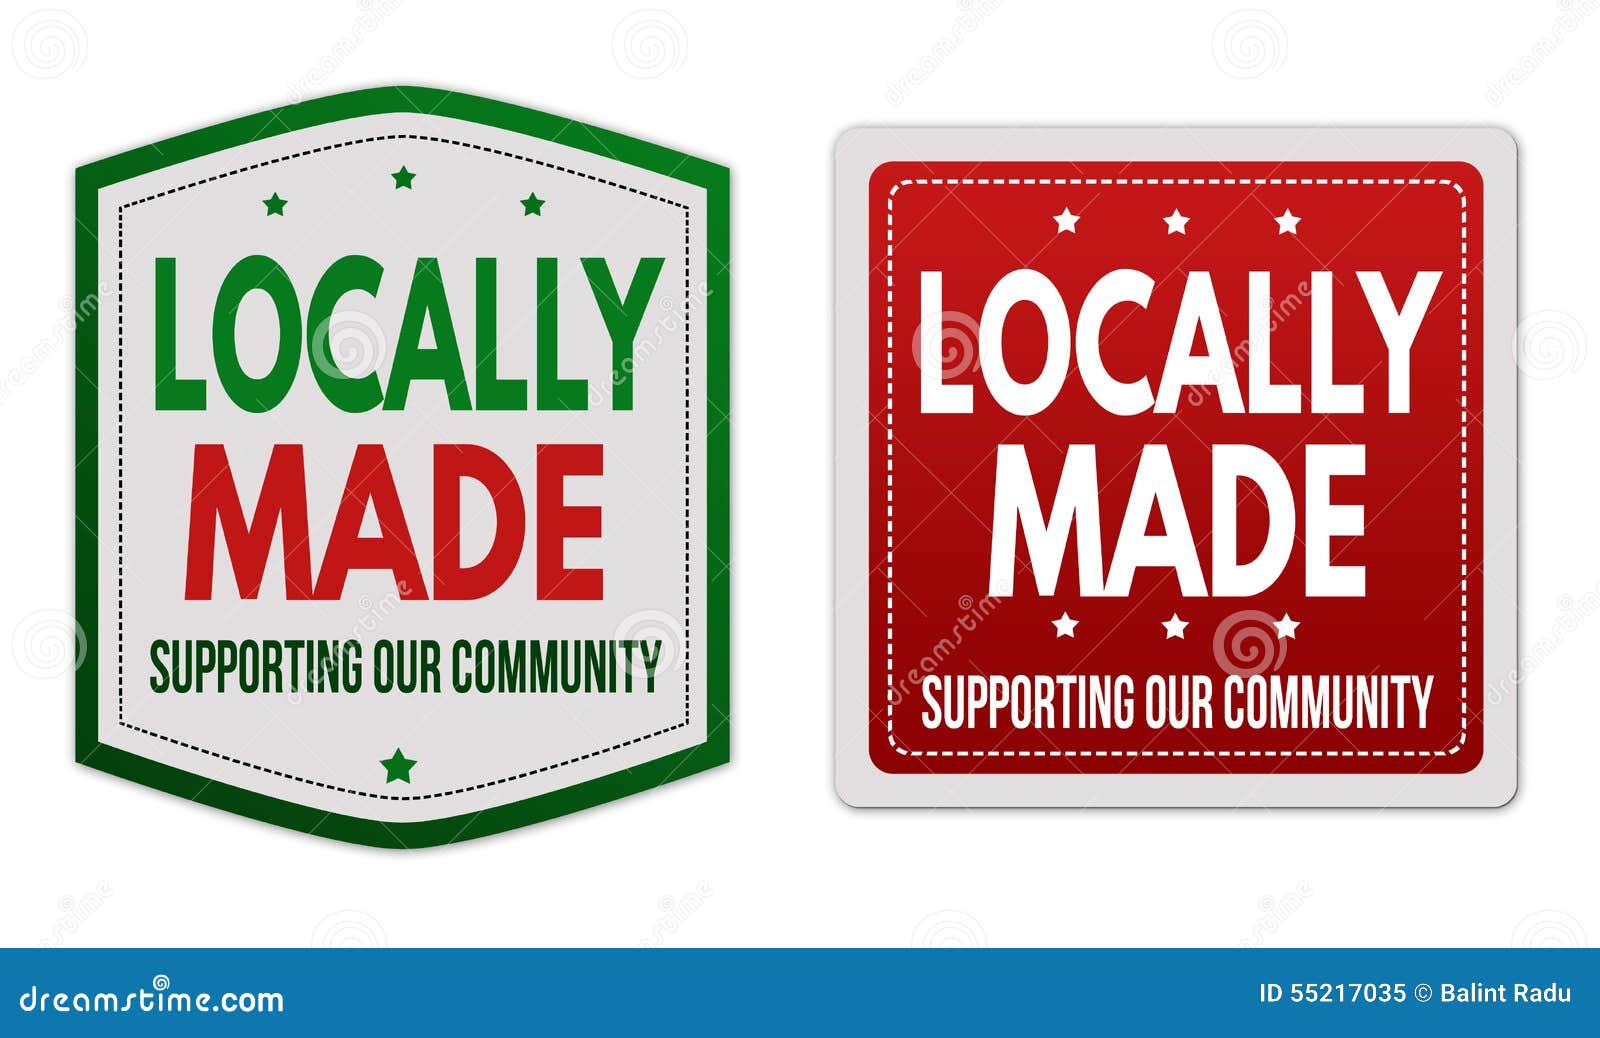 locally made stickers